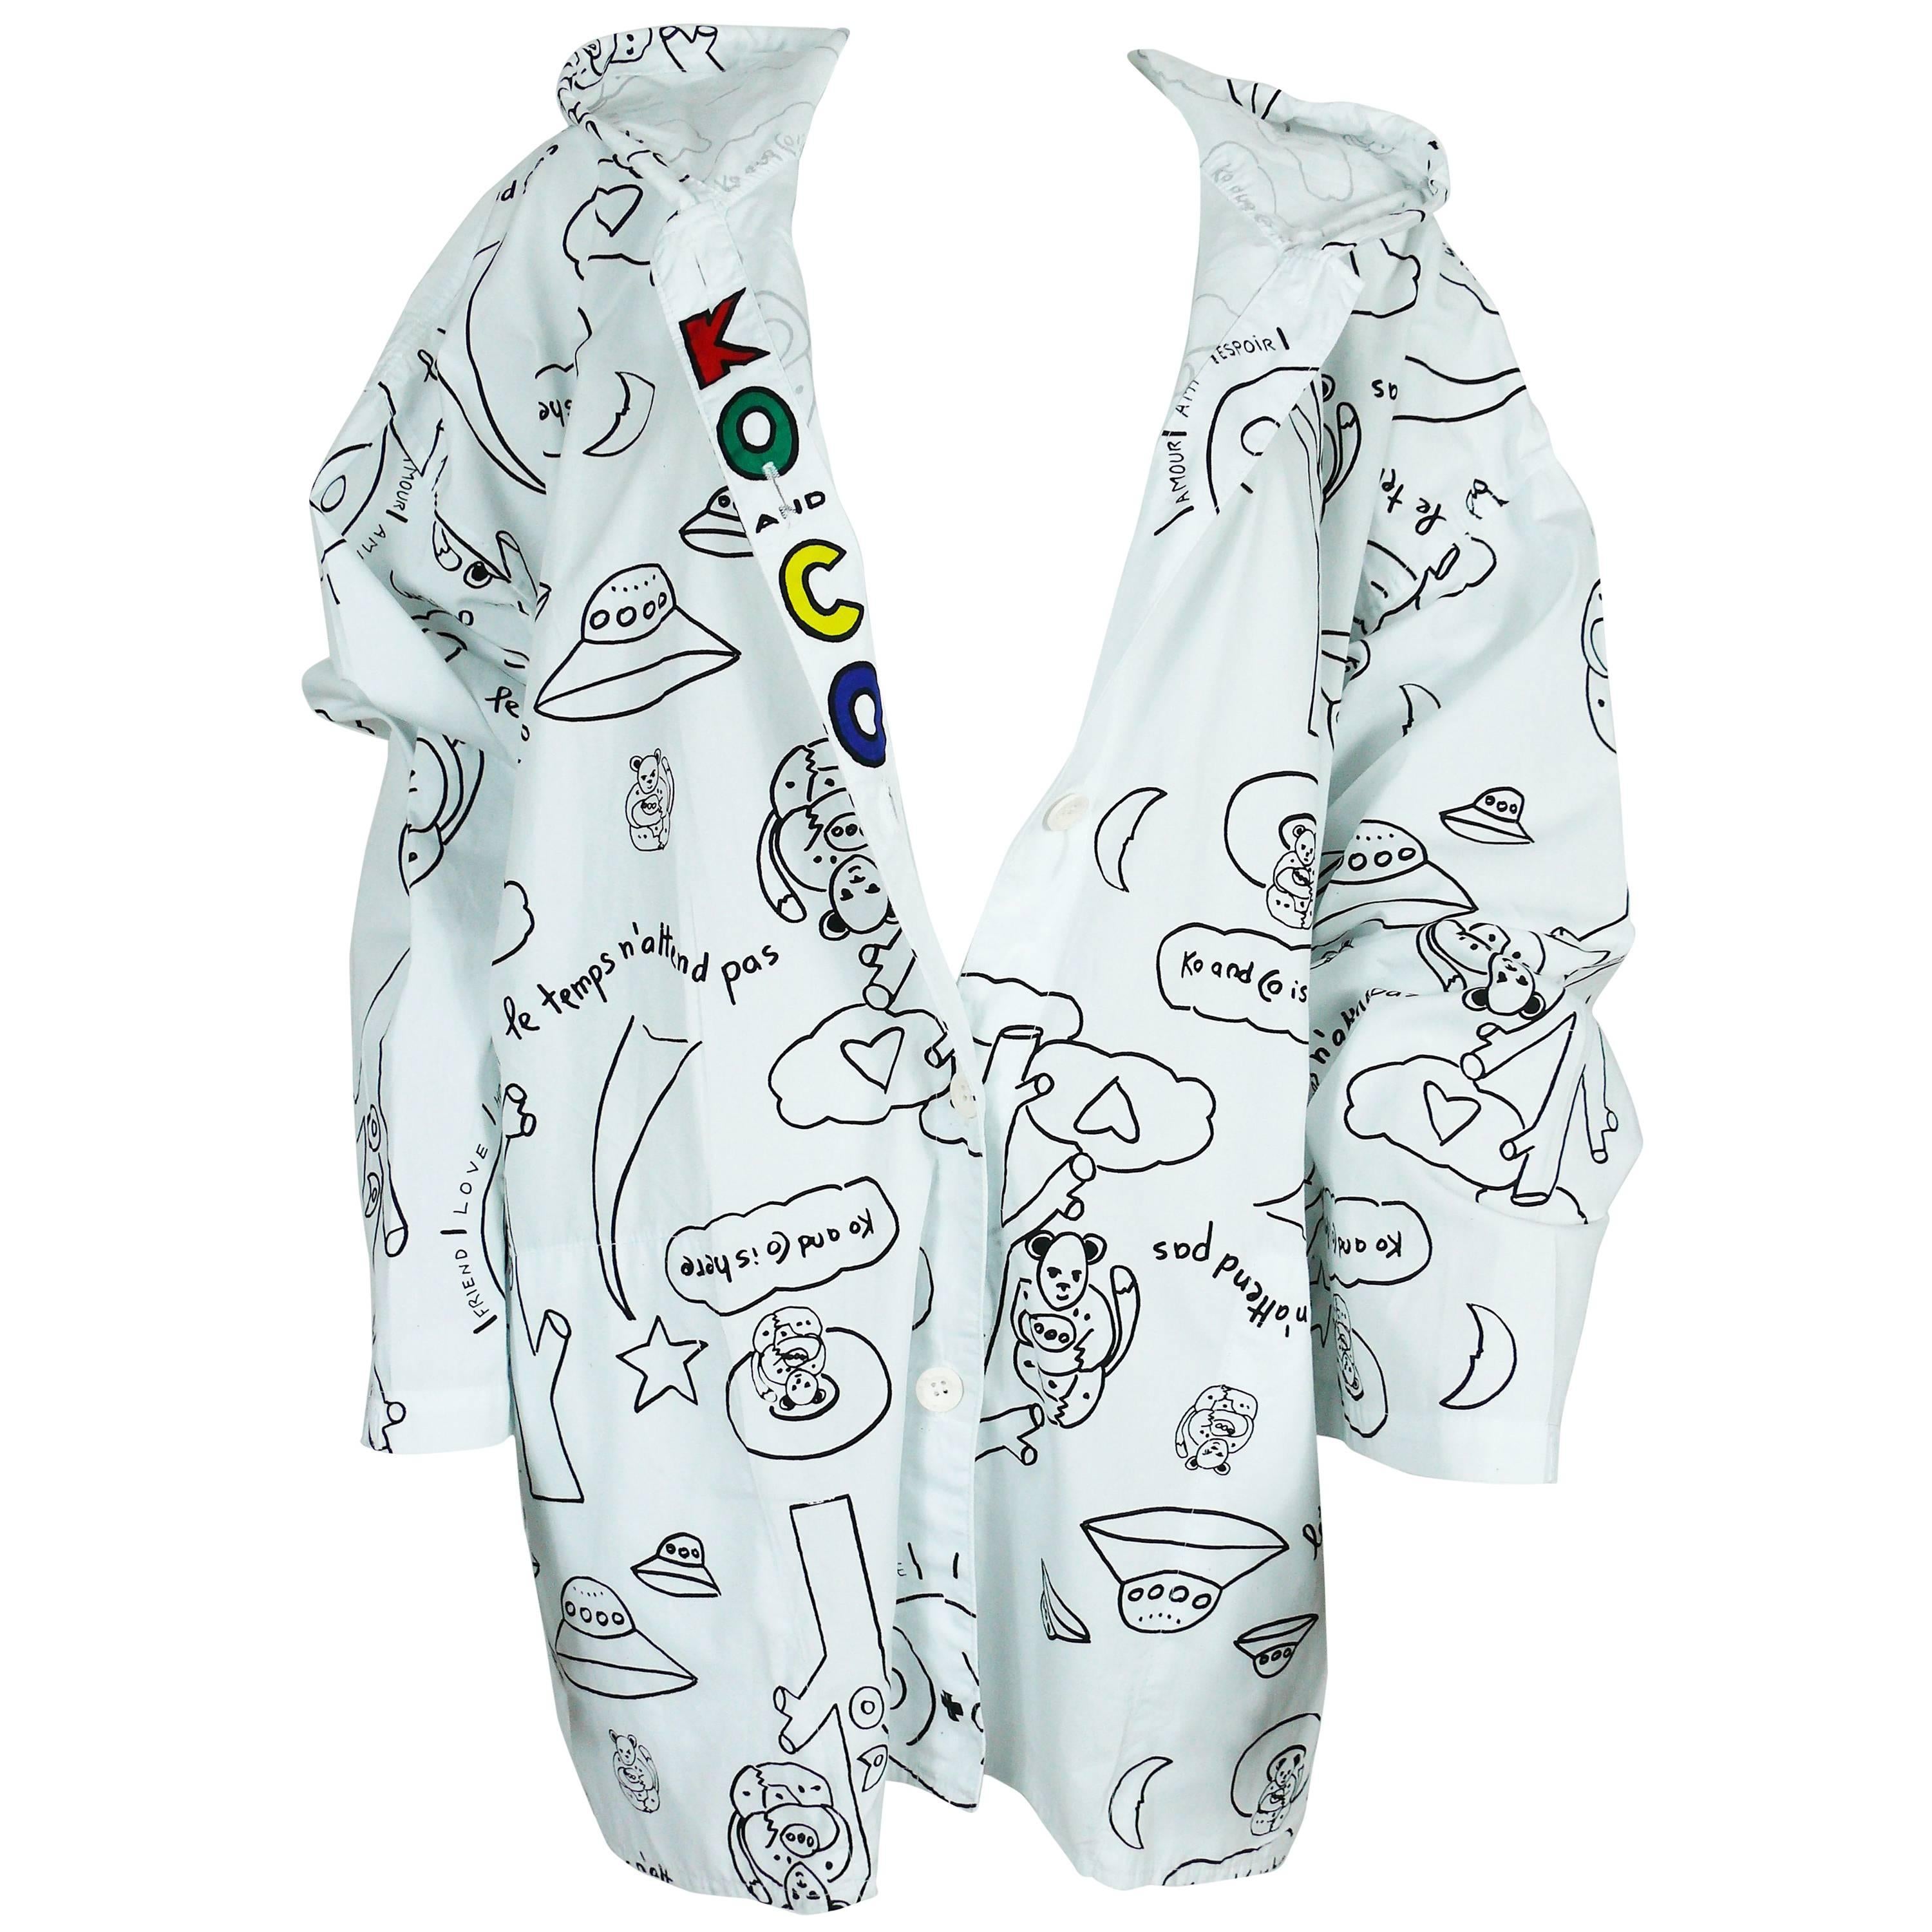 Ko and Co Vintage Cotton Print Hooded Jacket  For Sale